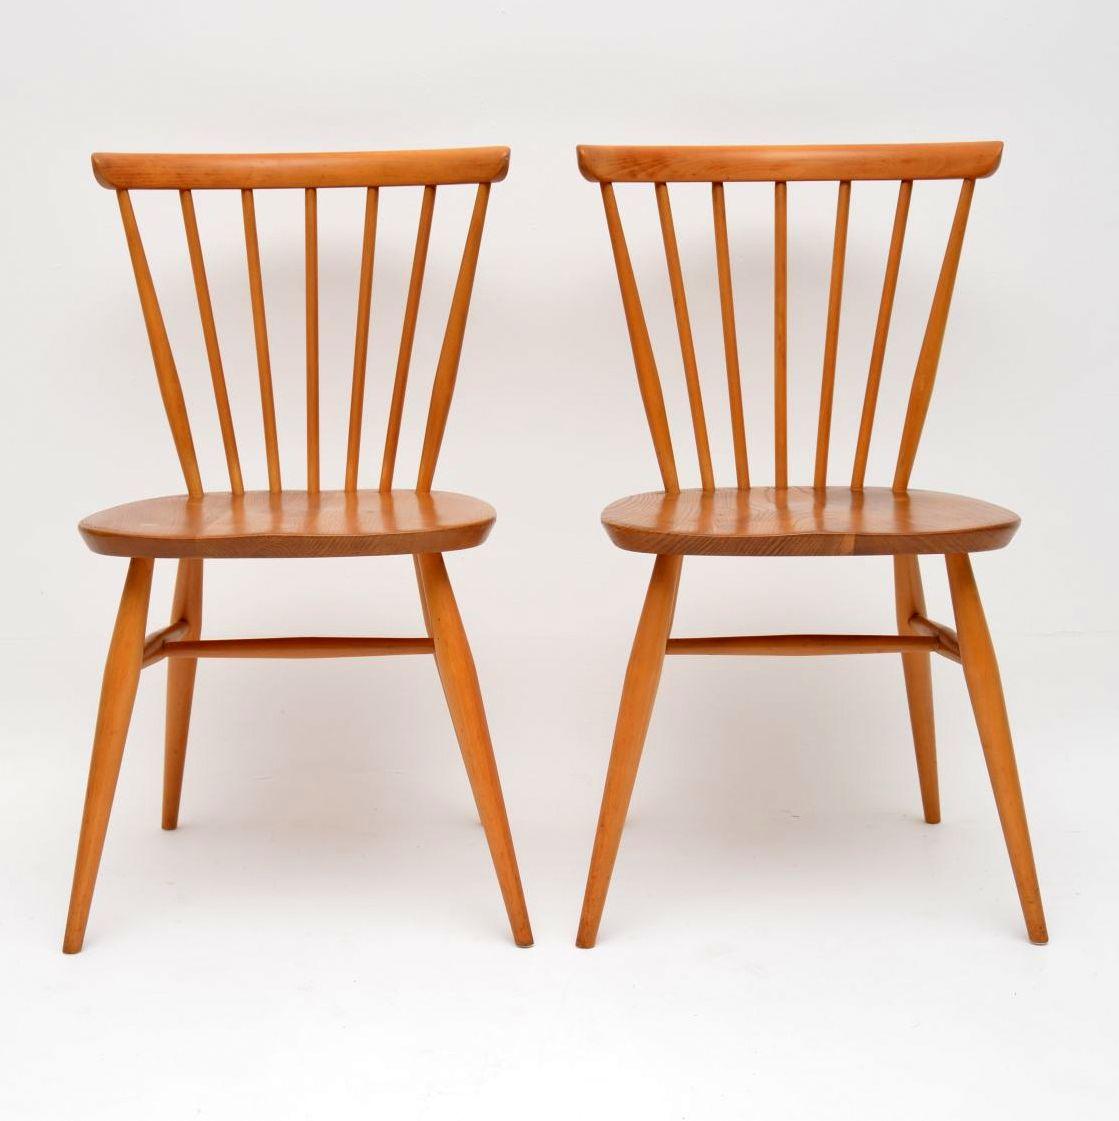 A top quality and very stylish pair of vintage side chairs by Ercol, these date from the 1960s-1970s. They are in superb condition for their age, with only some extremely minor wear here and there. They are clean sturdy and sound, with stunning